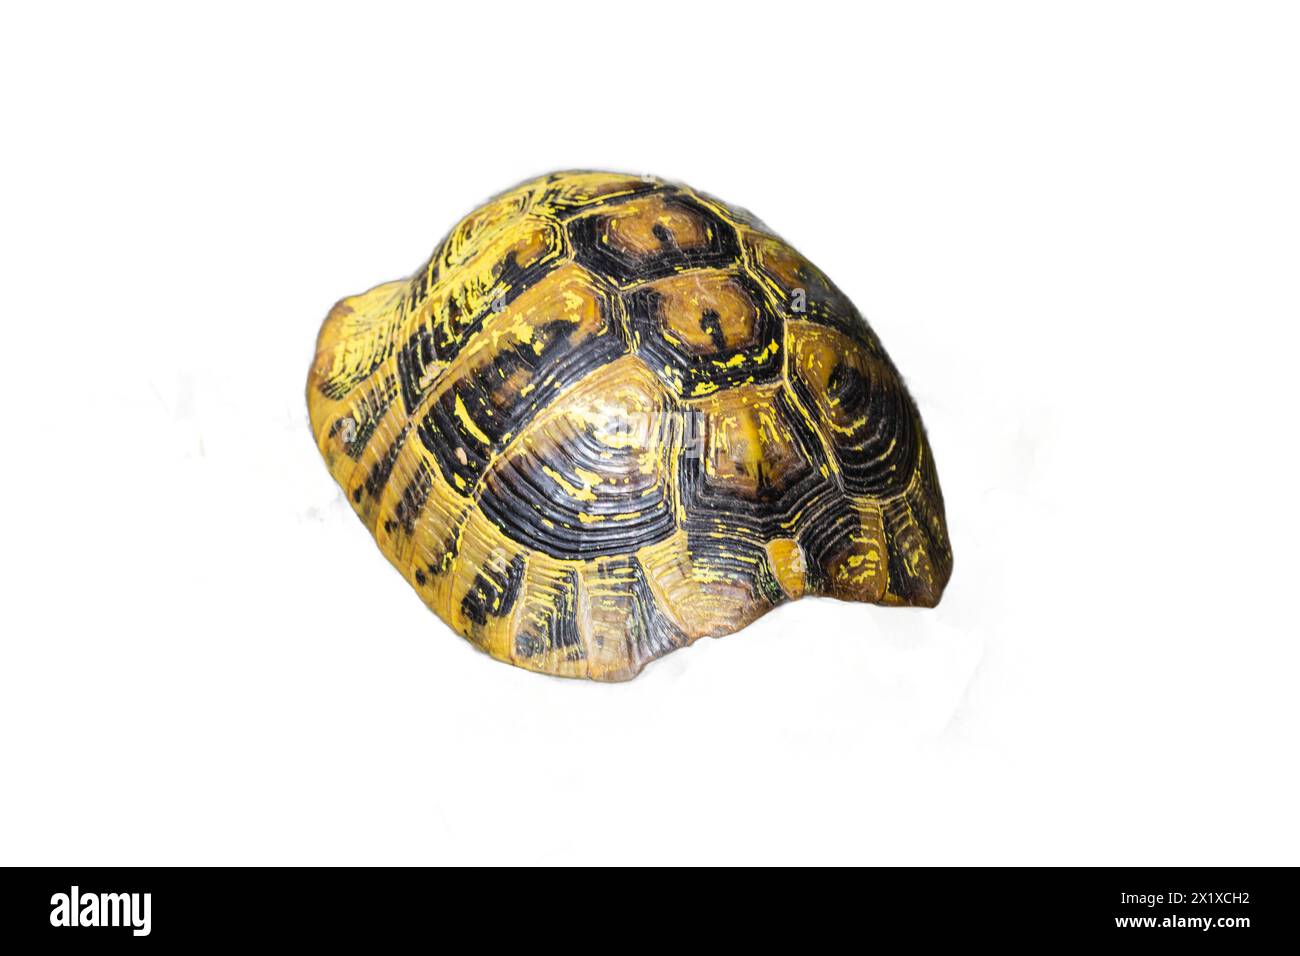 A detailed tortoise shell isolated on a transparent background. Perfect for use in design projects, wildlife illustrations, and educational materials. Stock Photo